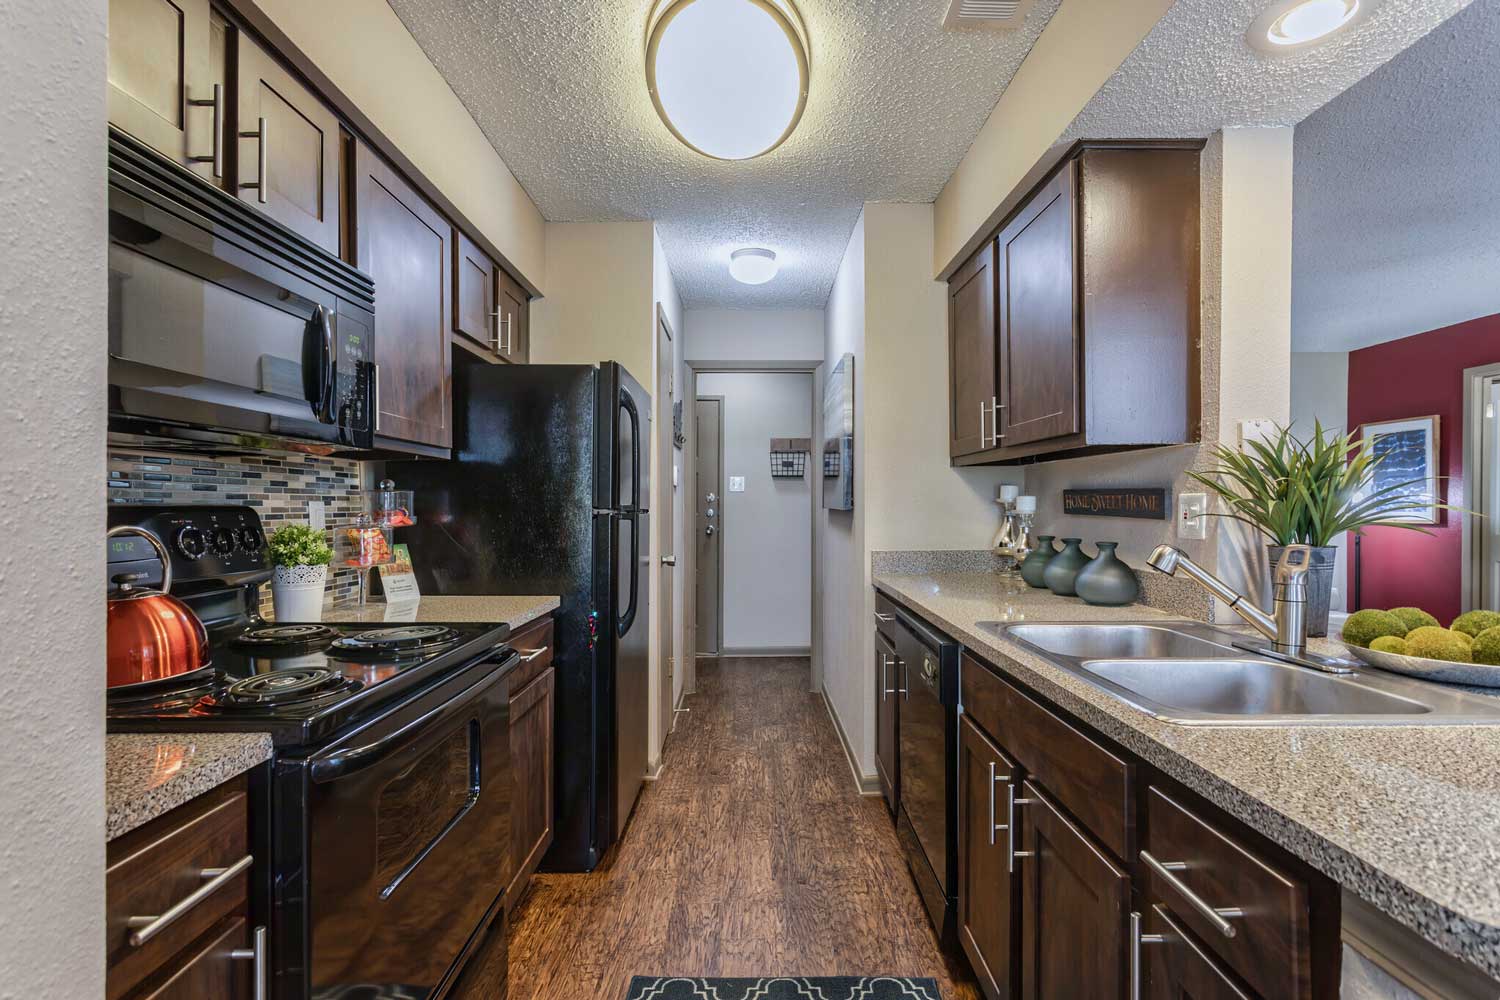 Galley-Style Kitchen at Ridgeview Place Apartments in Irving, TX